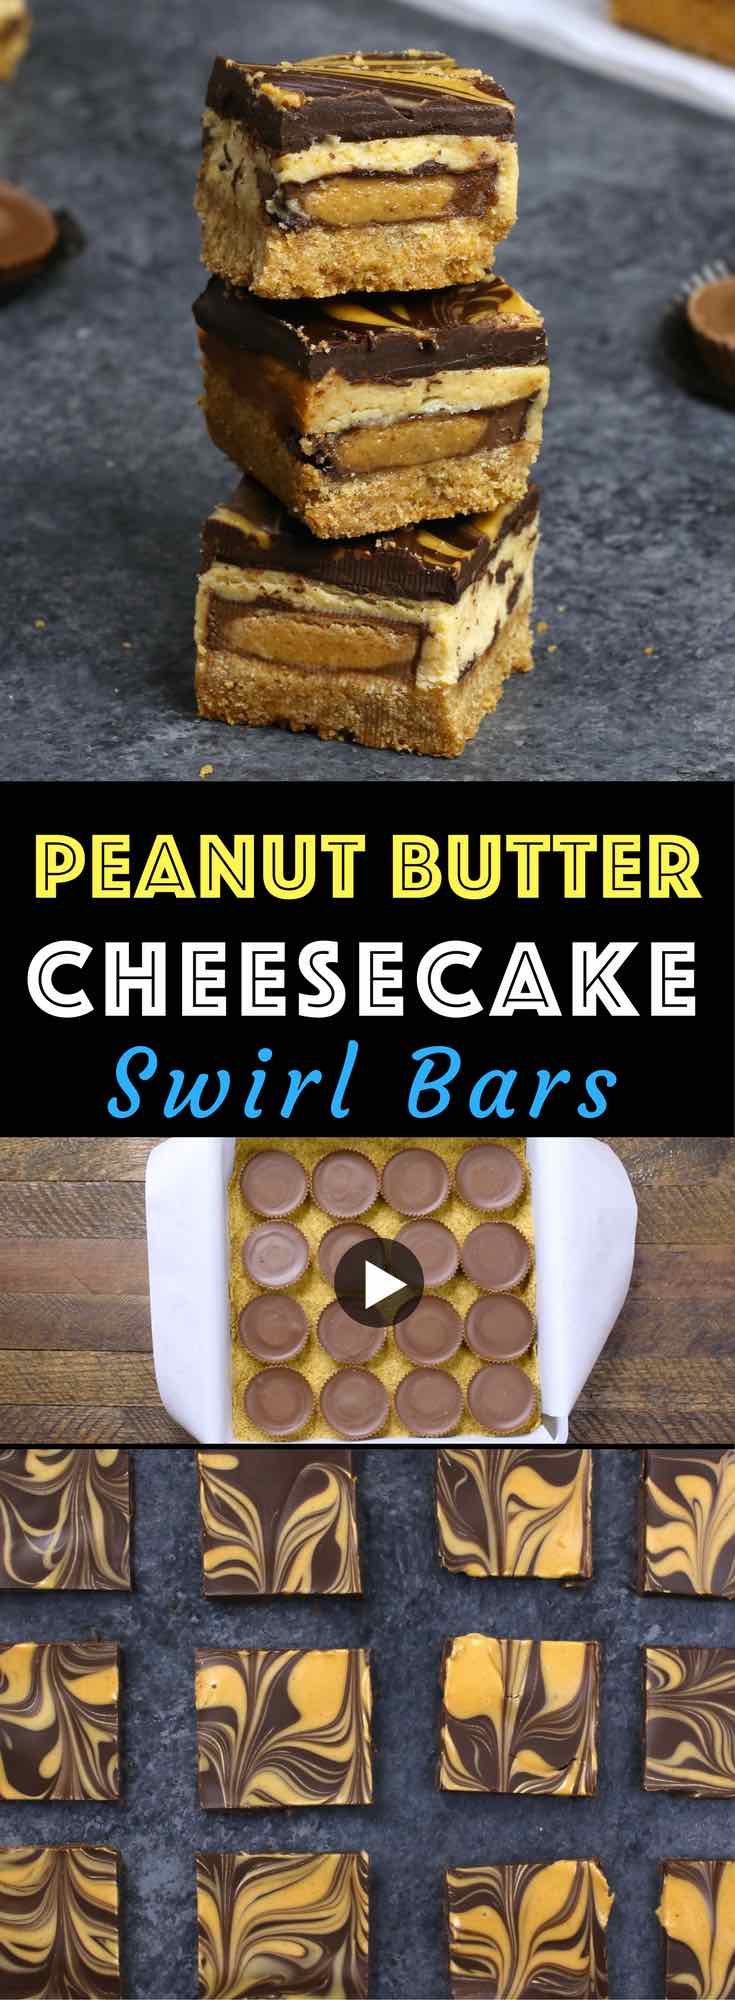 These Chocolate Peanut Butter Cheesecake Bars are creamy and smooth with irresistible chocolate peanut butter flavors! They're perfect for parties, snacks and decadent treats for any celebration.